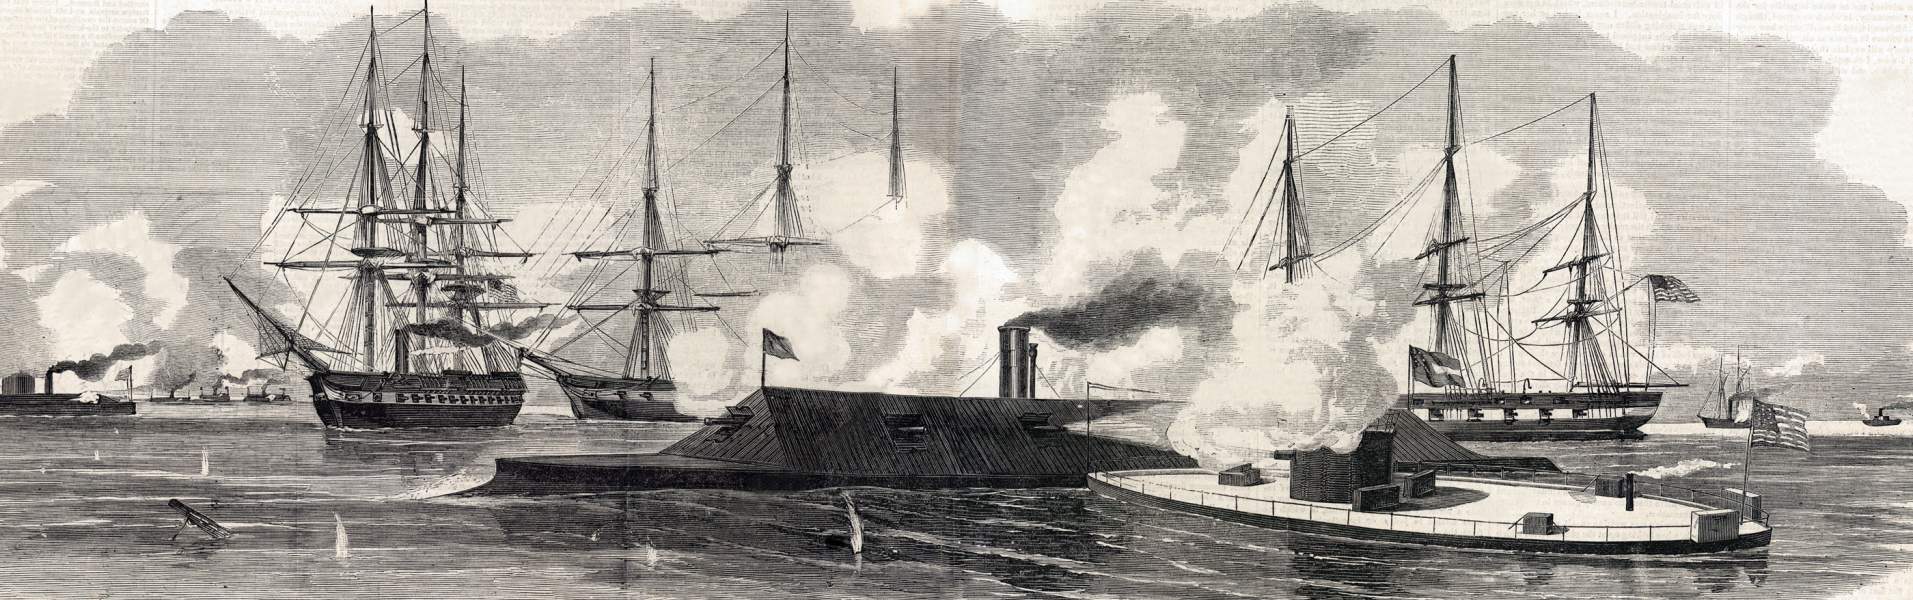 U.S.S. Monitor and C.S.S. Virginia in action off Newport News, March 9, 1862, artist's impression, zoomable image